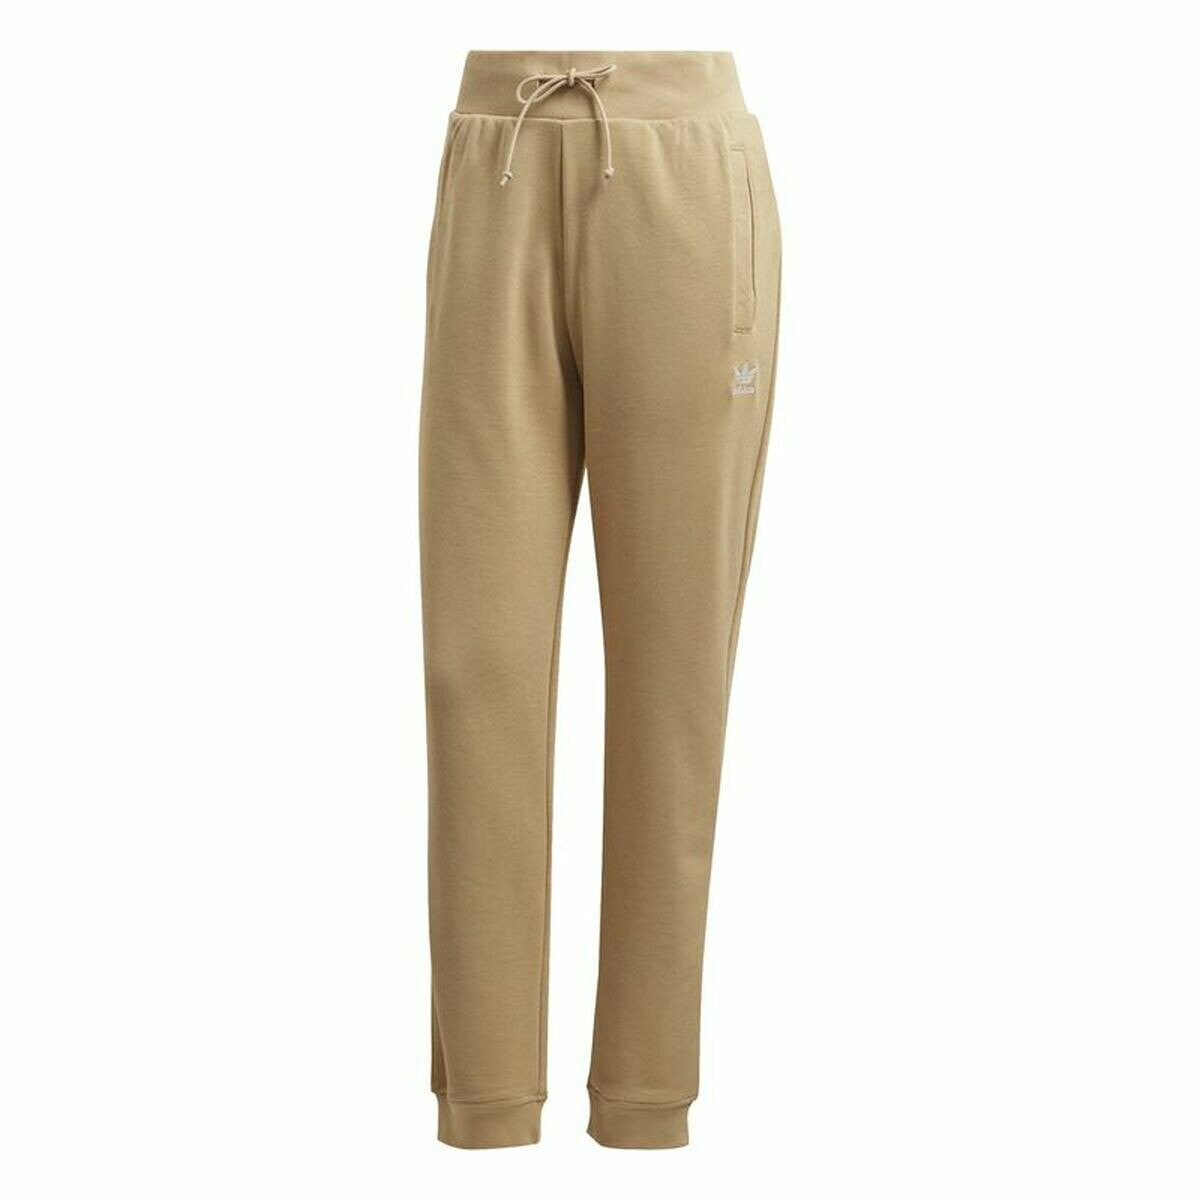 Long Sports Trousers Adidas Track Brown Lady